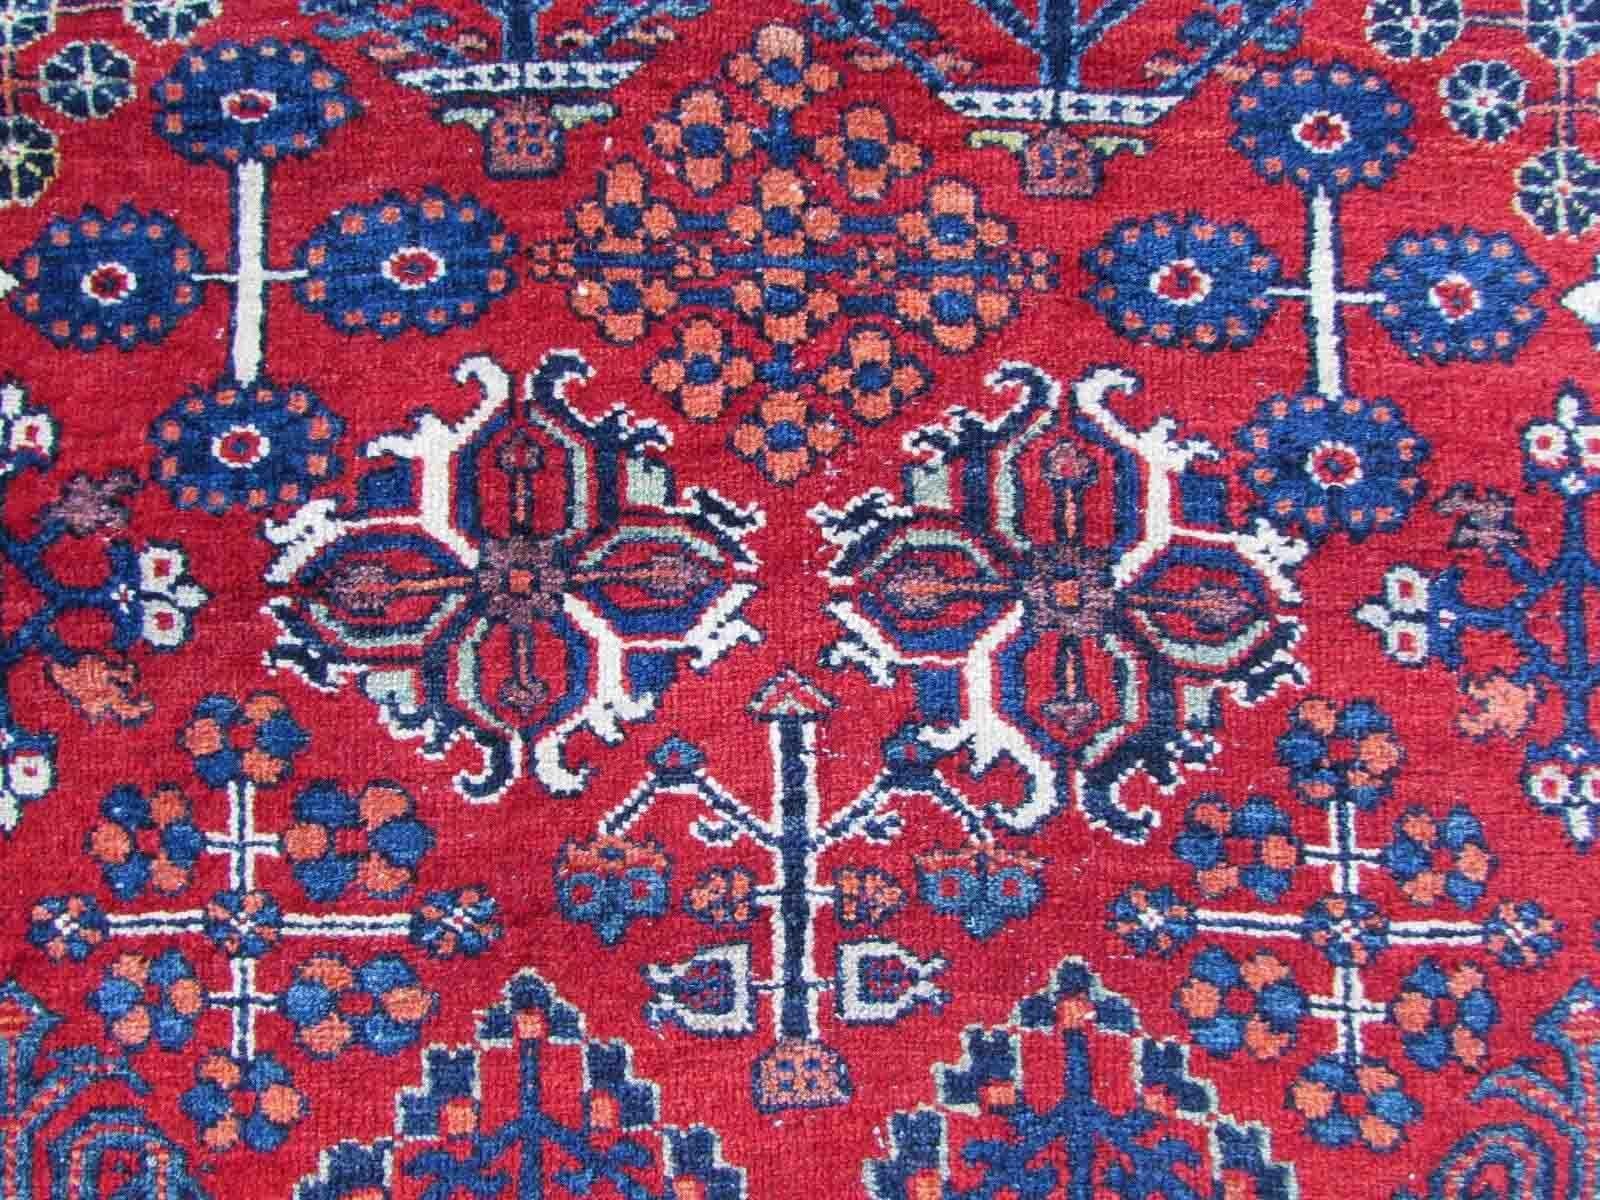 Handmade antique Joshagan rug in bright red color. The rug is from the beginning of 20th century mostly in original good condition, it has some low pile

-condition: original good, some low pile,

-circa: 1920s,

-size: 4.1' x 6.6' (128cm x